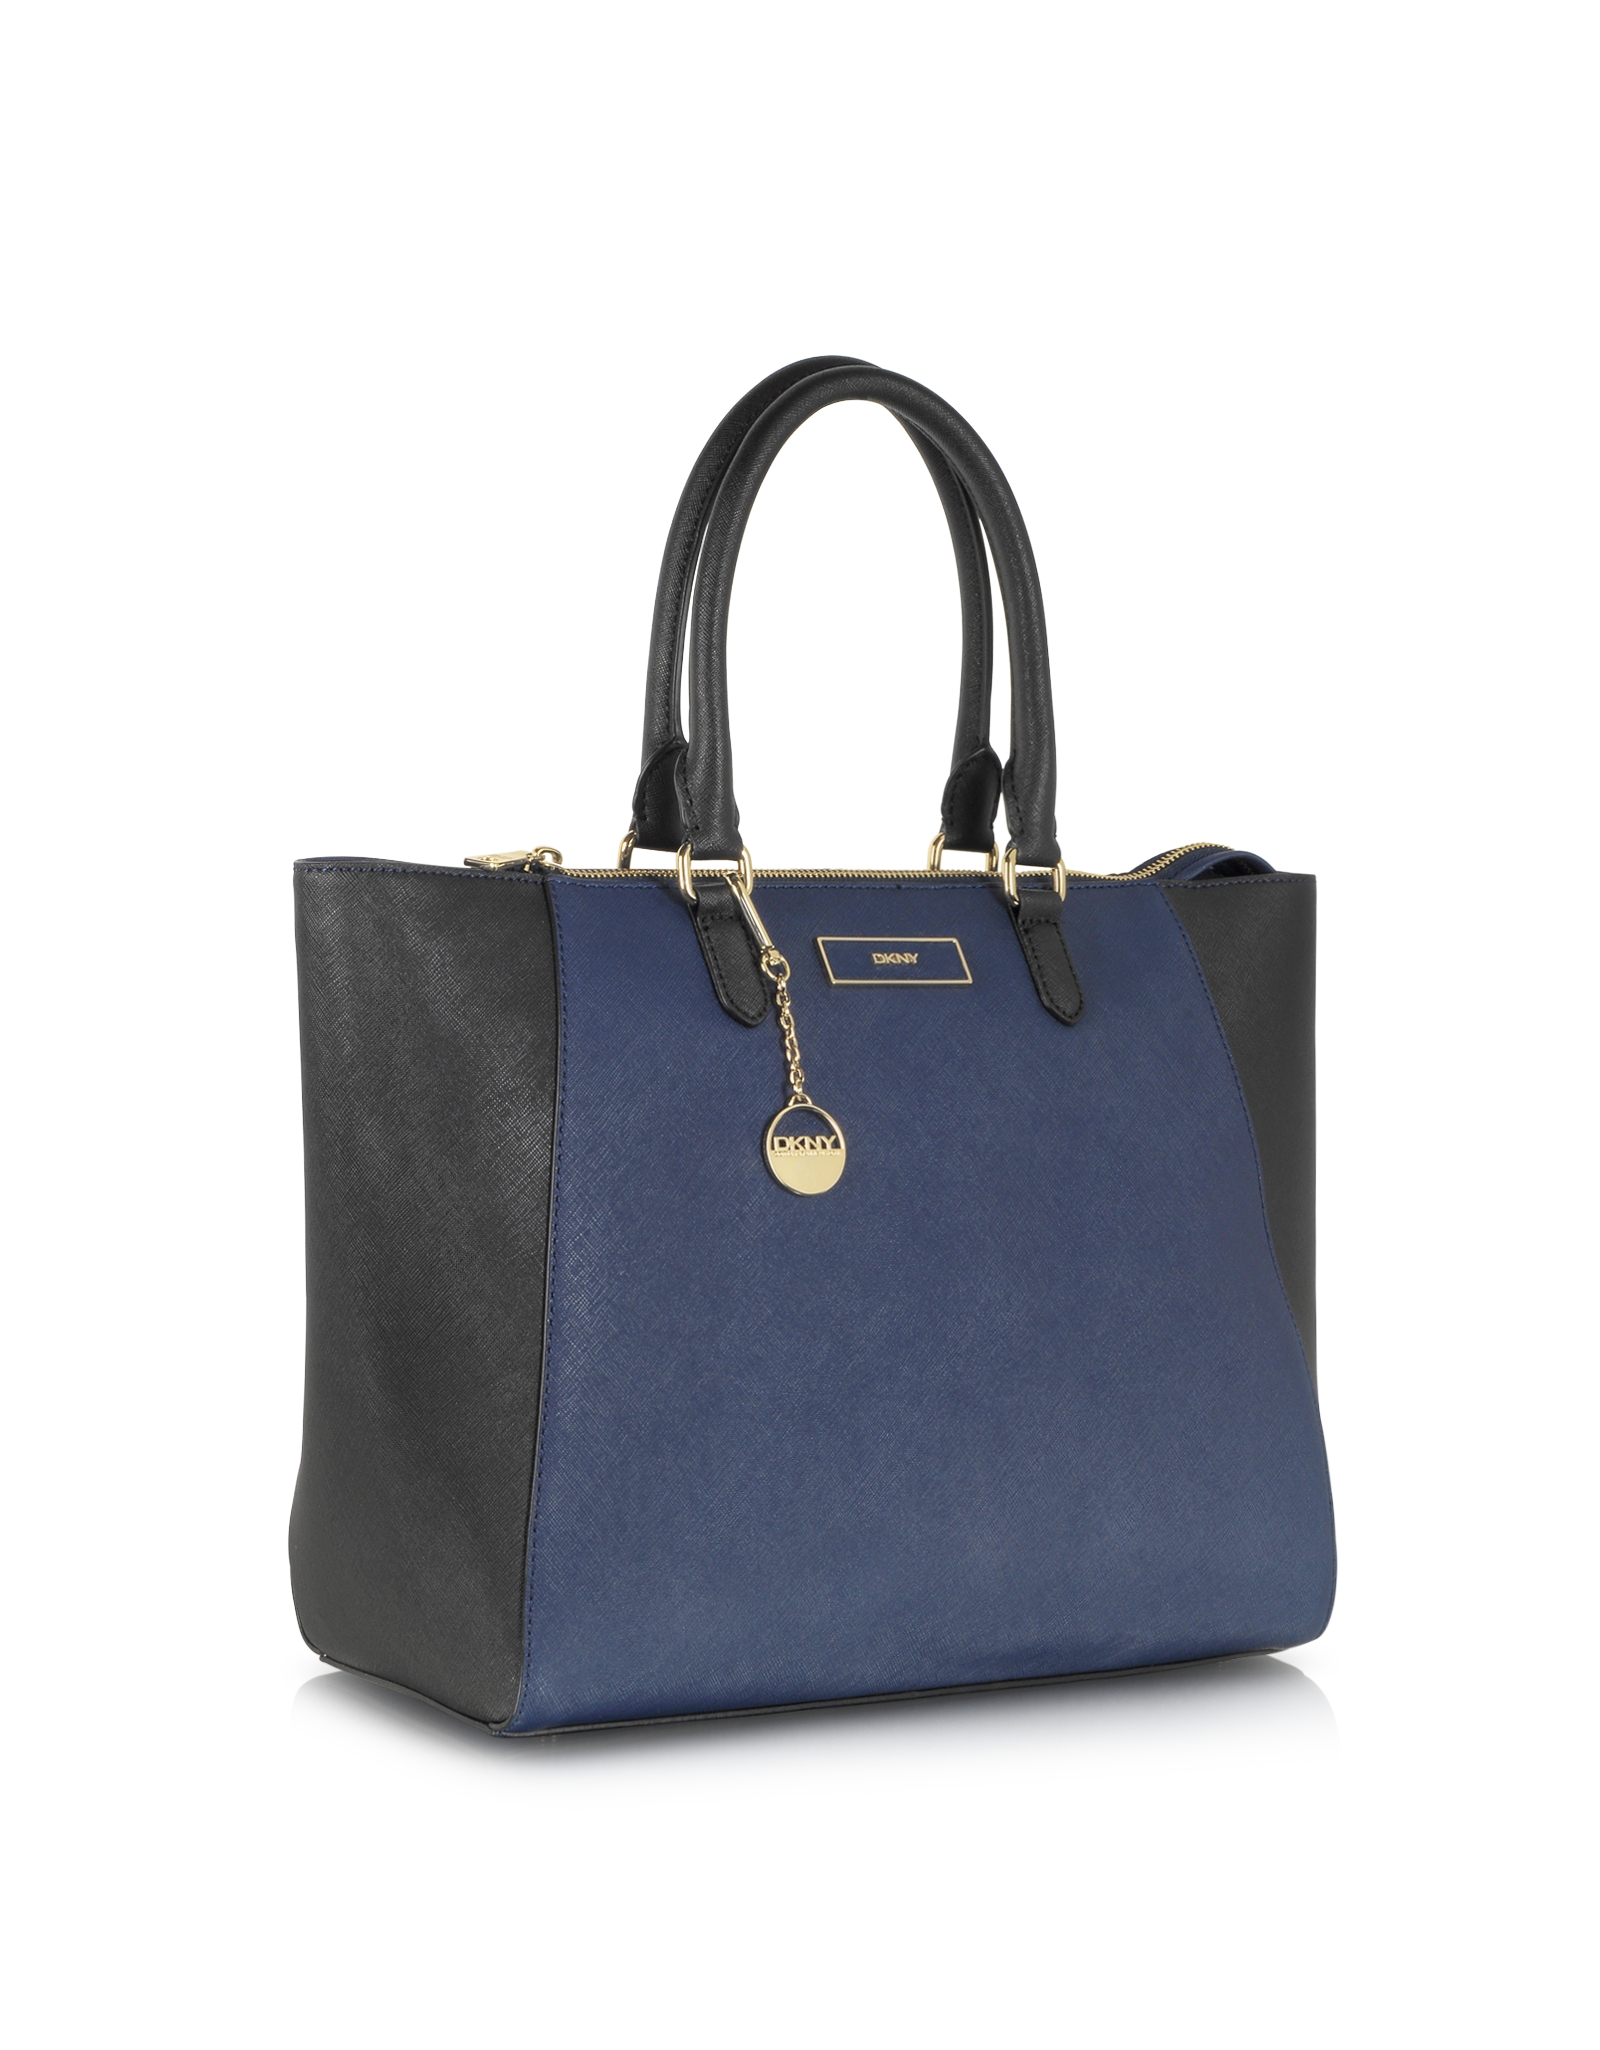 Lyst - Dkny Color Block Saffiano Leather Large Ew Satchel in Blue